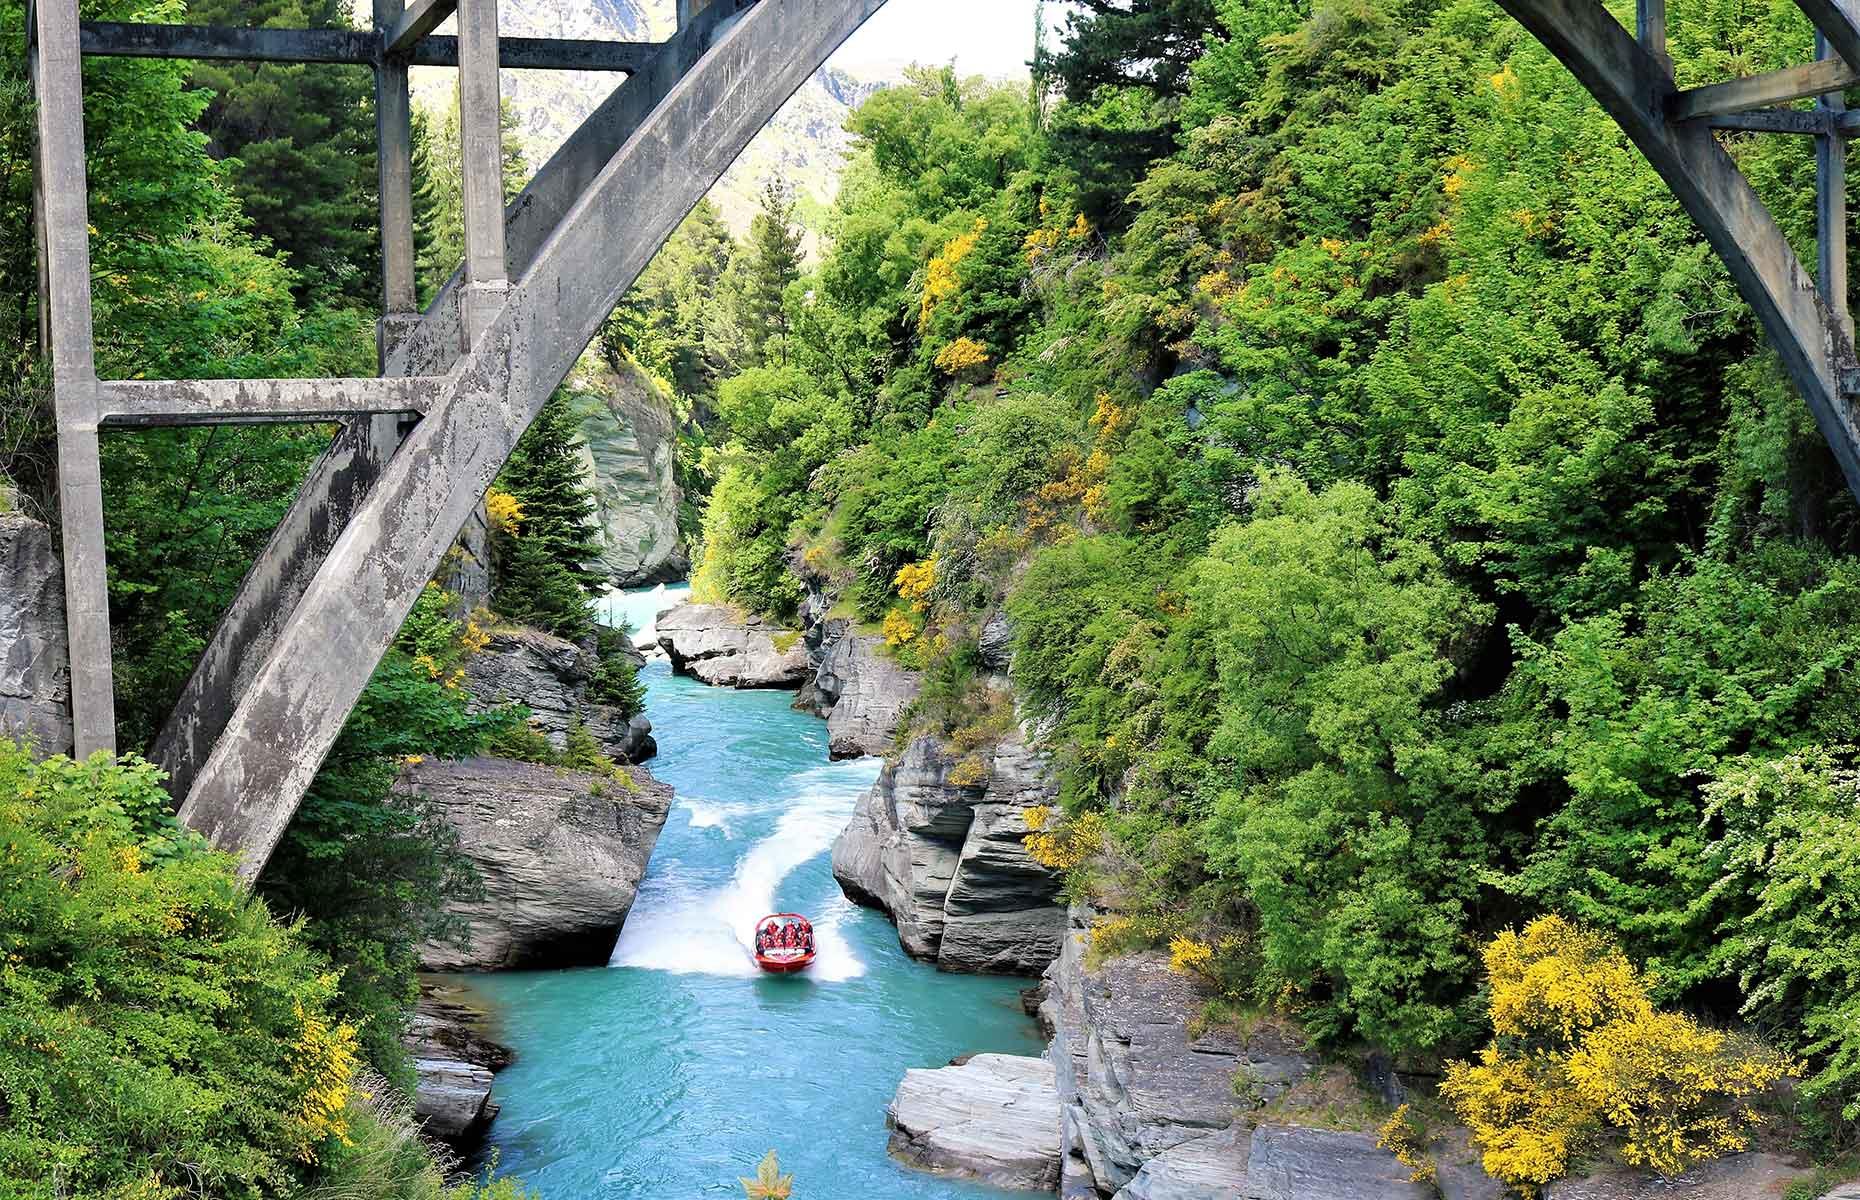 <p>The unbelievably blue waters of the fast-flowing Shotover River are a mesmerizing spot for jet-boating on the Shotover Jet. Your heart is in your mouth as you race through the rocky and narrow canyon, skimming rocks and spinning through sharp turns. The jet is owned by the Ngāi Tahu, the Māori people of this land, and is the only company allowed to operate in this area of the river.</p>